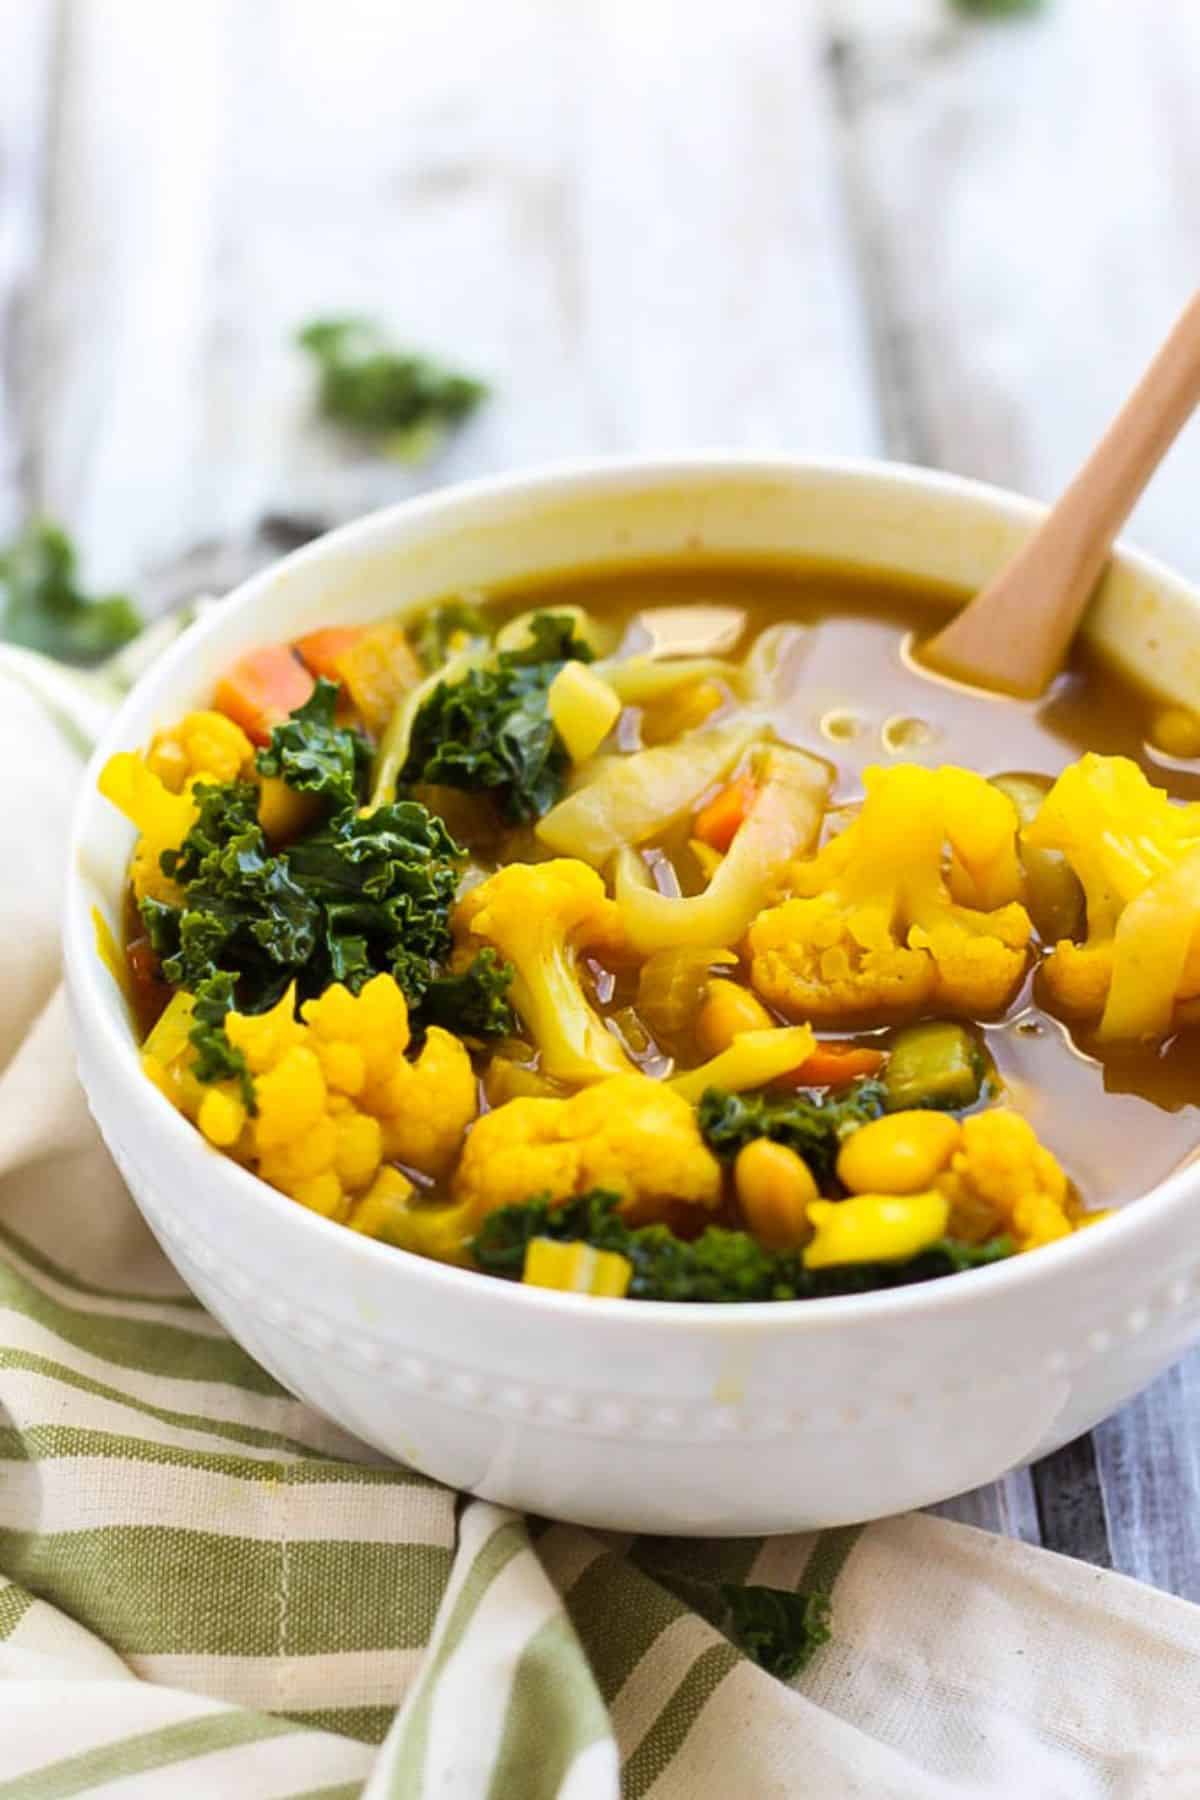 Turmeric Cauliflower Soup in a white bowl with a wooden spoon.